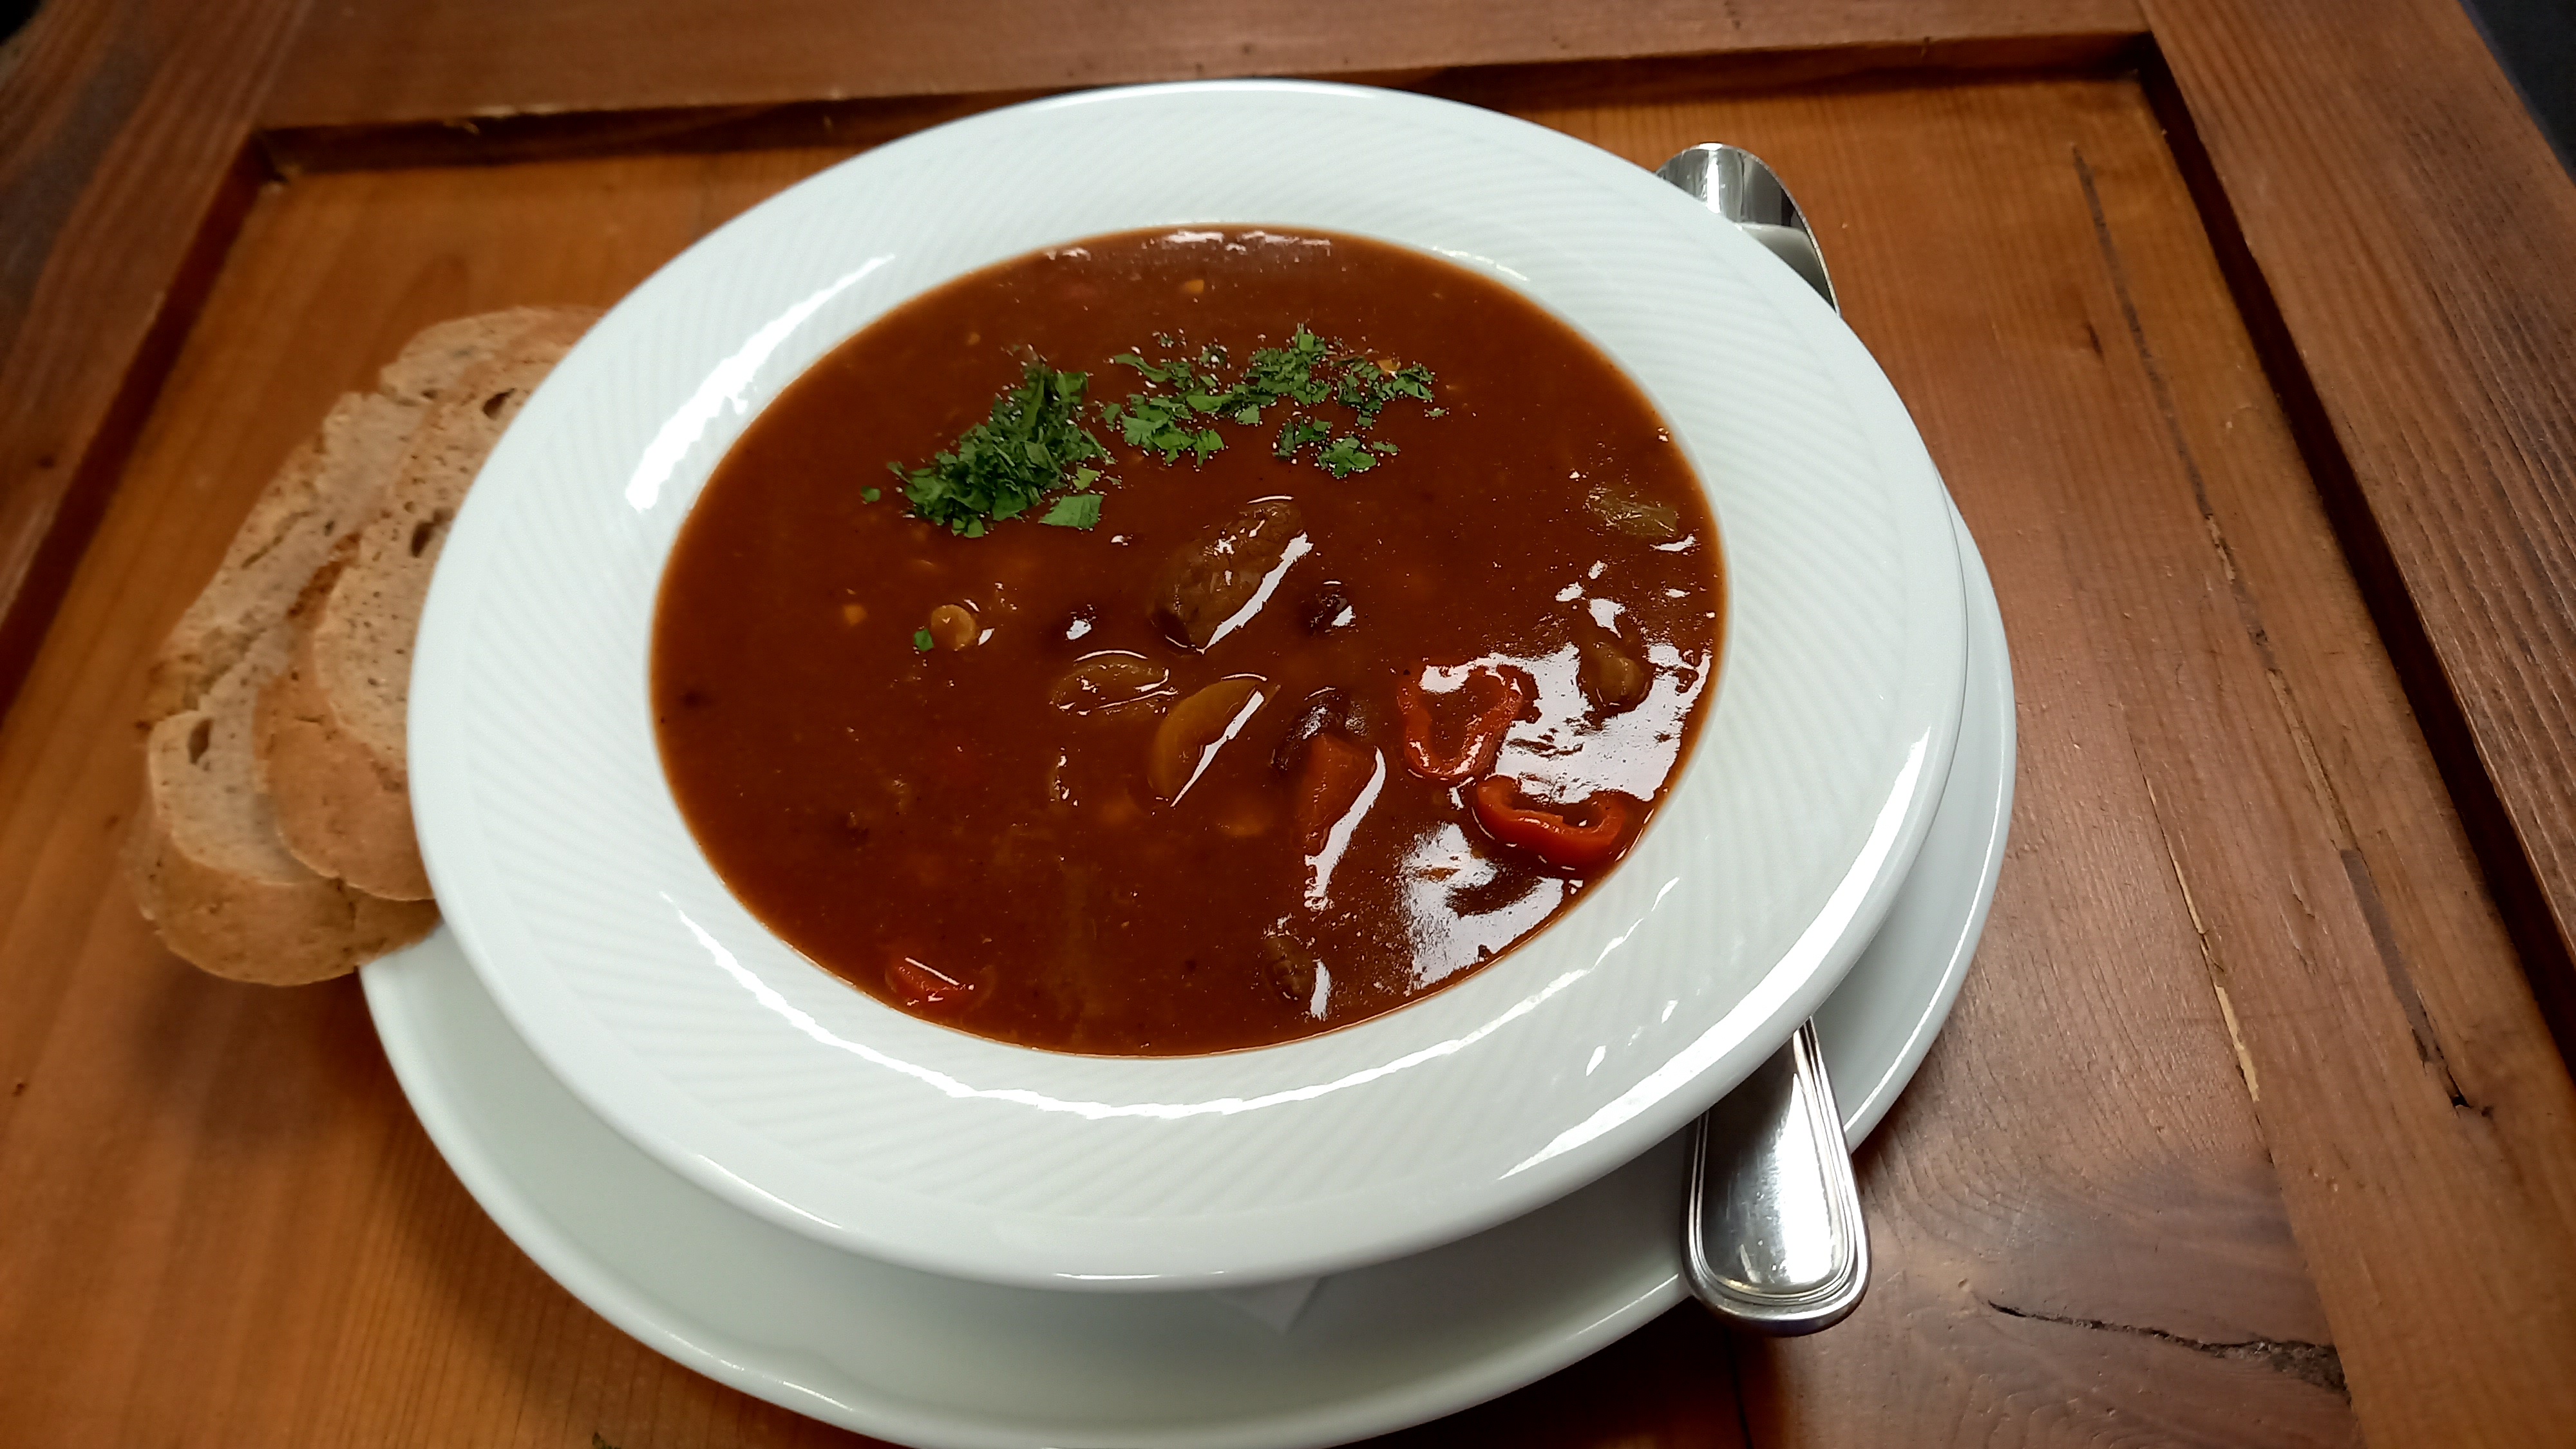 Steakhaus-Suppe